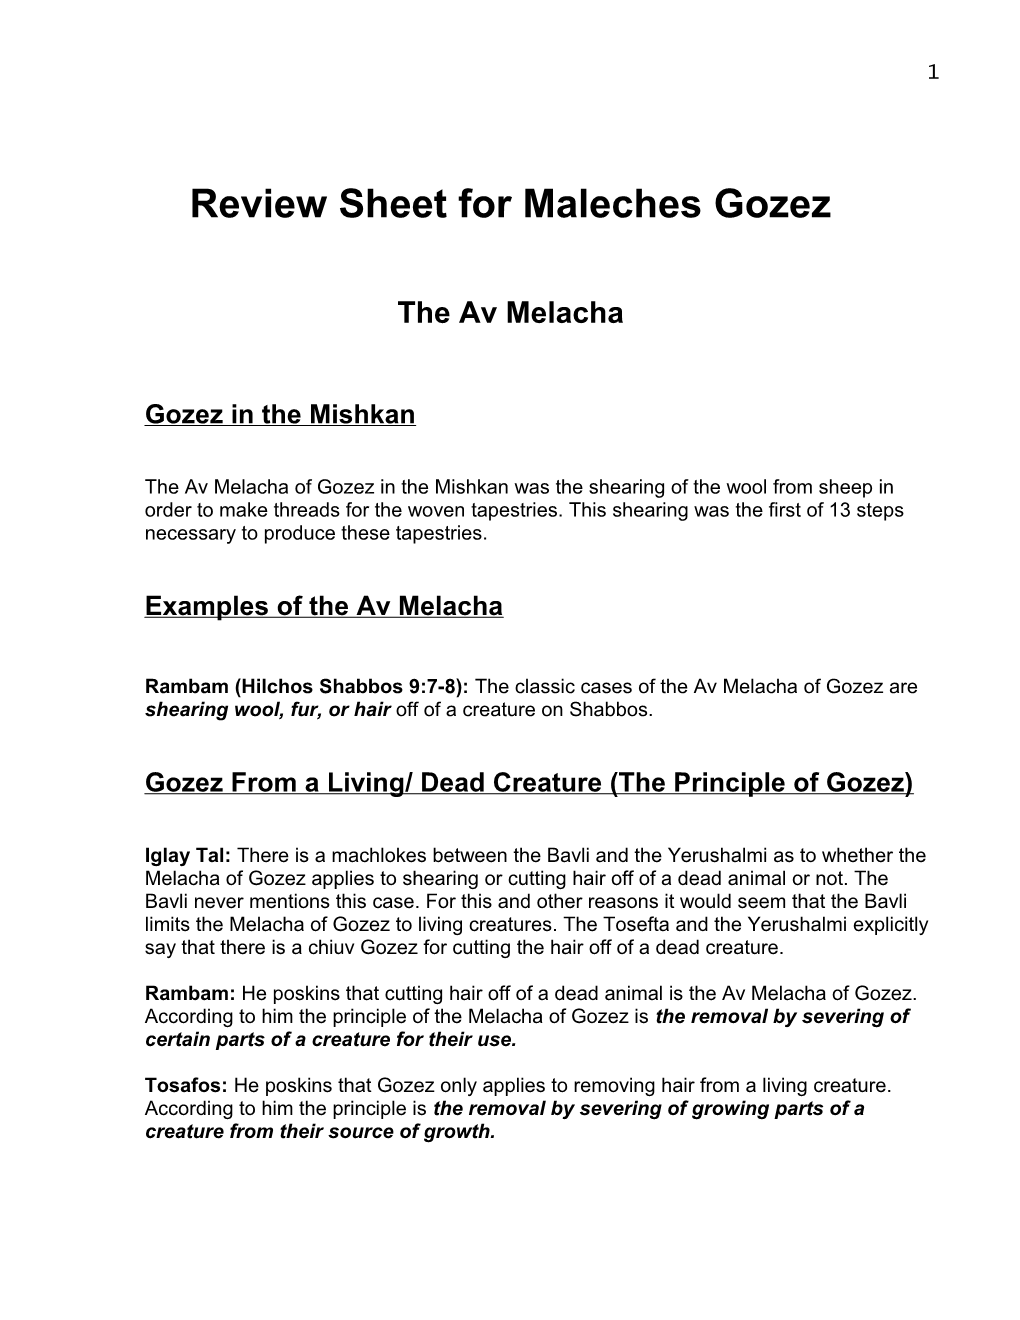 Review Sheet for Maleches Gozez